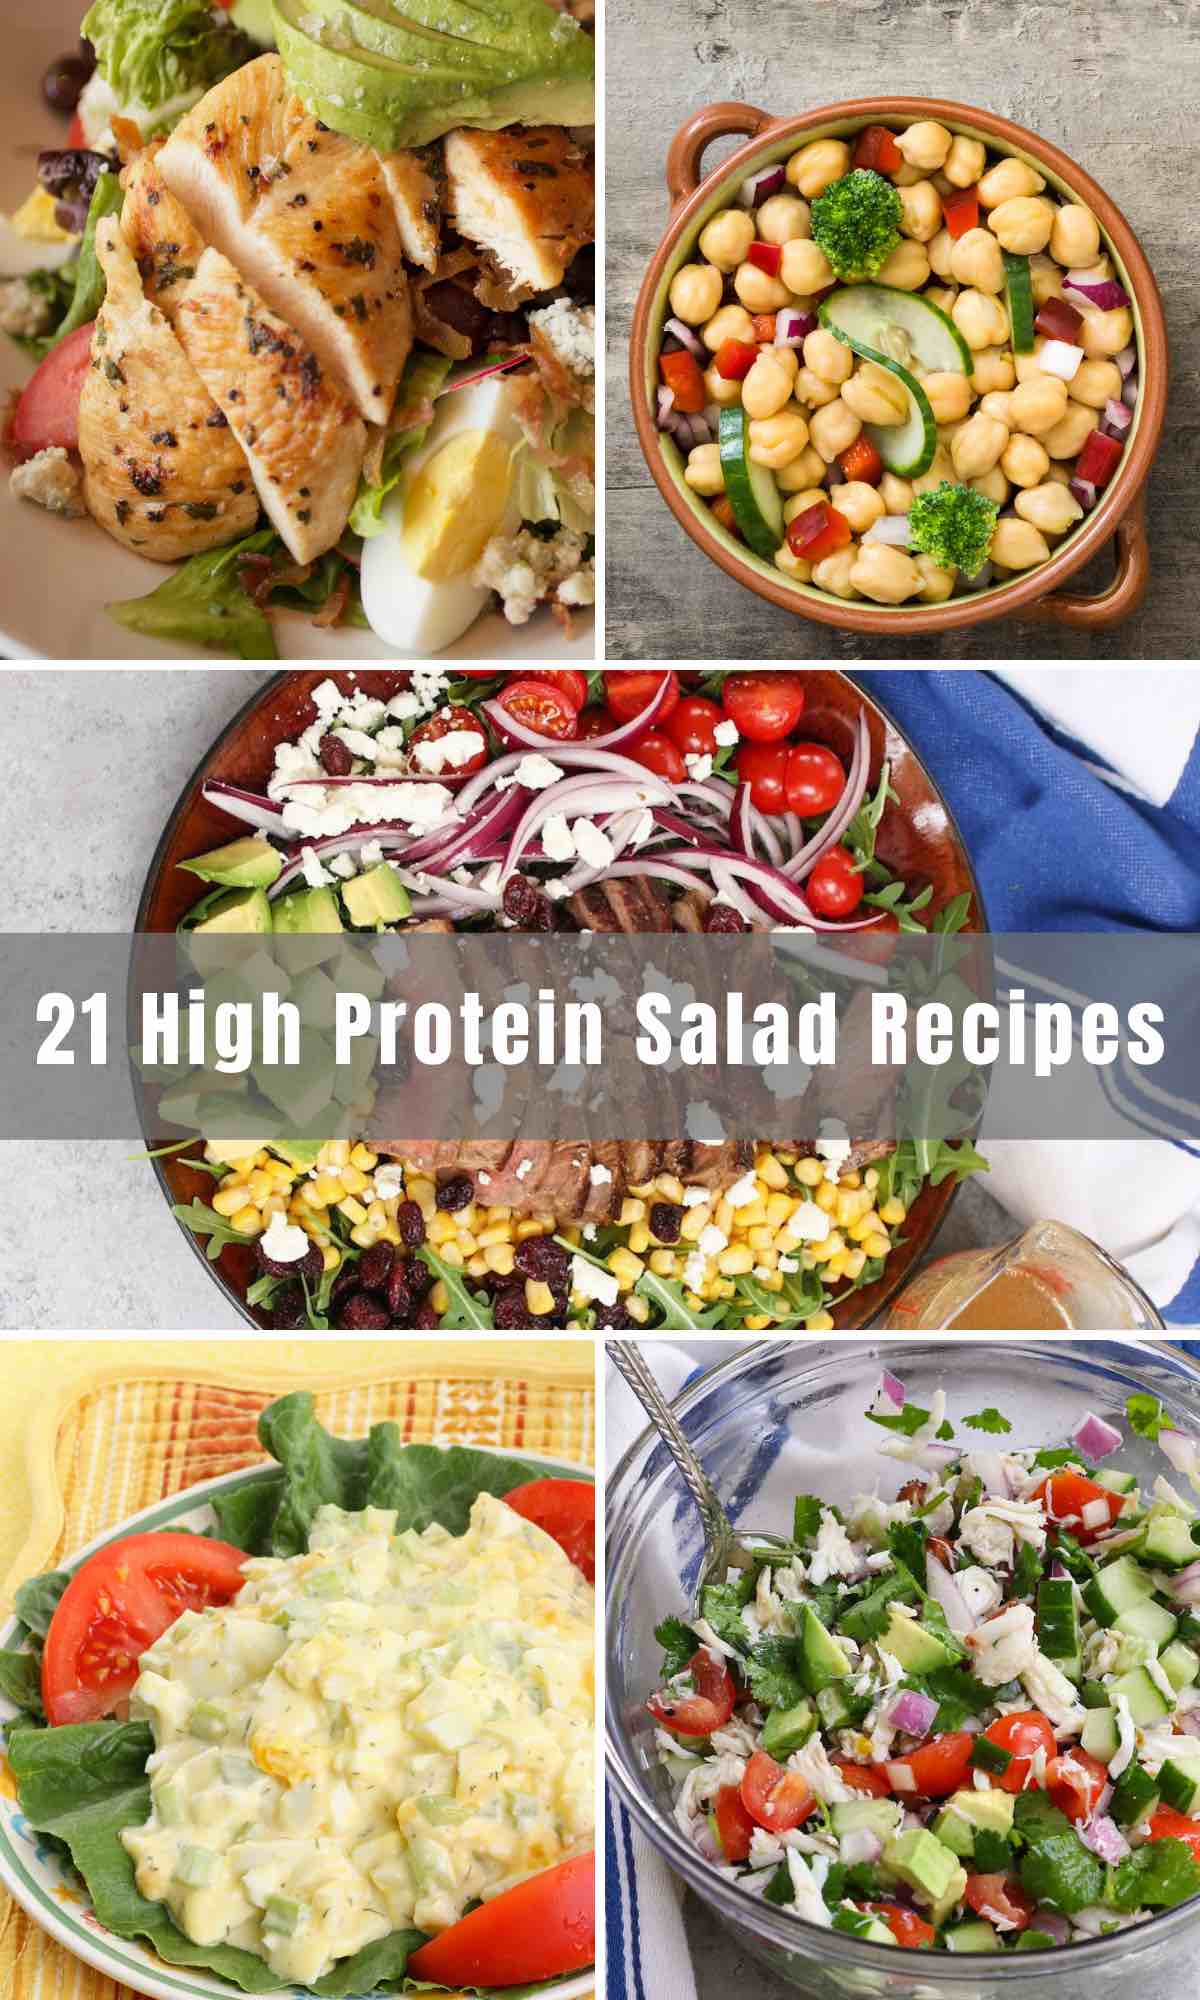 Whether you’re on a weight loss journey or just maintaining overall health, these satisfying High Protein Salads will help you to achieve your goals. With the right ingredients, salads are healthy, enjoyable and filling meals. A protein salad is great at keeping you full while fueling your energy throughout the day.